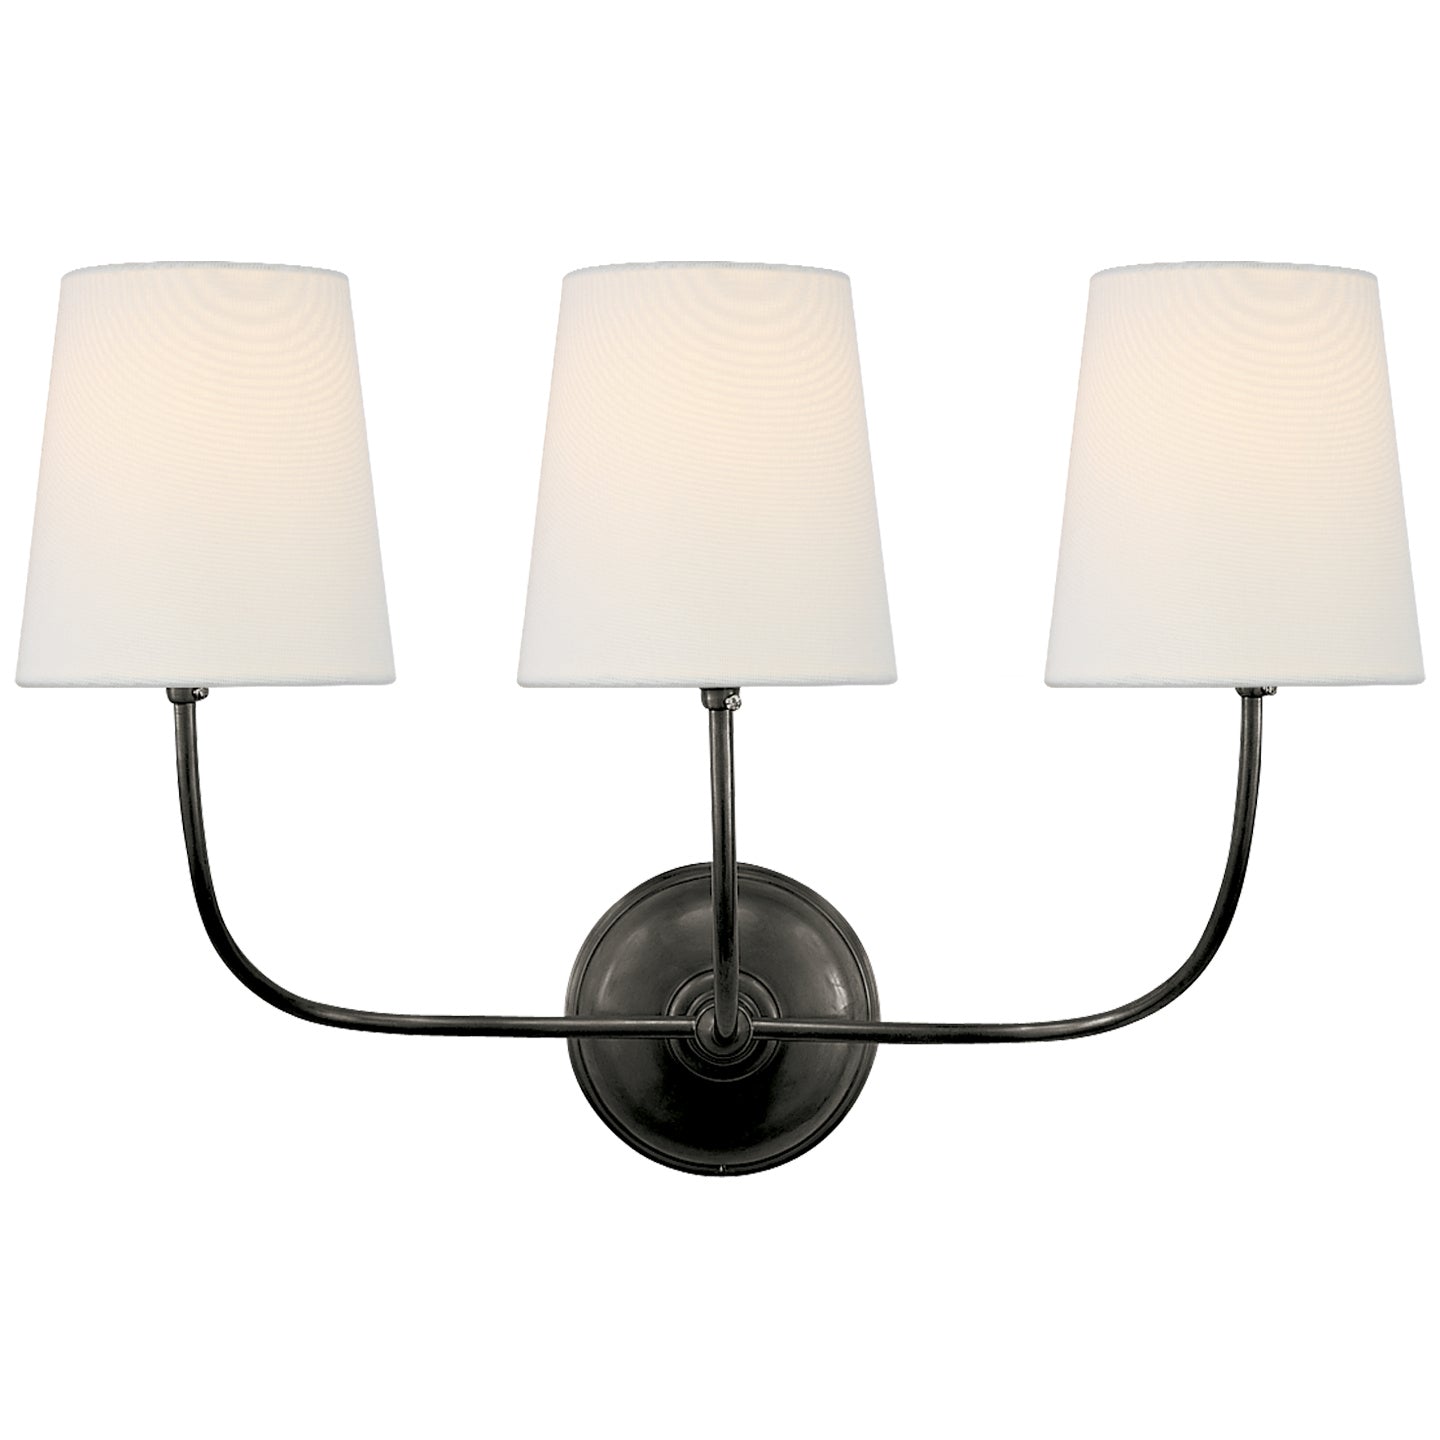 Visual Comfort Signature Canada - Two Light Wall Sconce